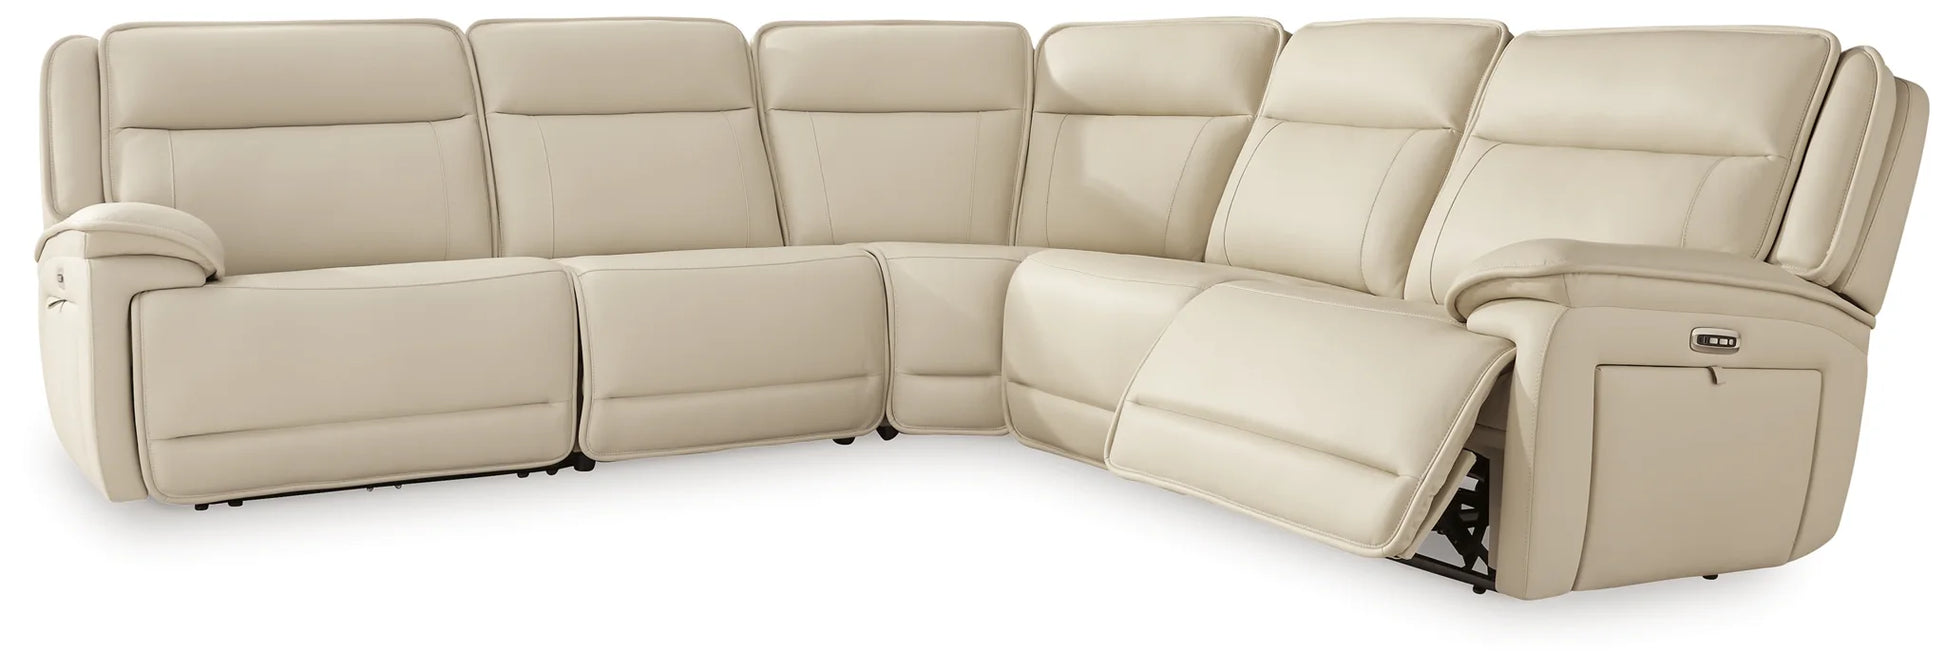 Double Deal - Almond - 5-Piece Power Reclining Sectional